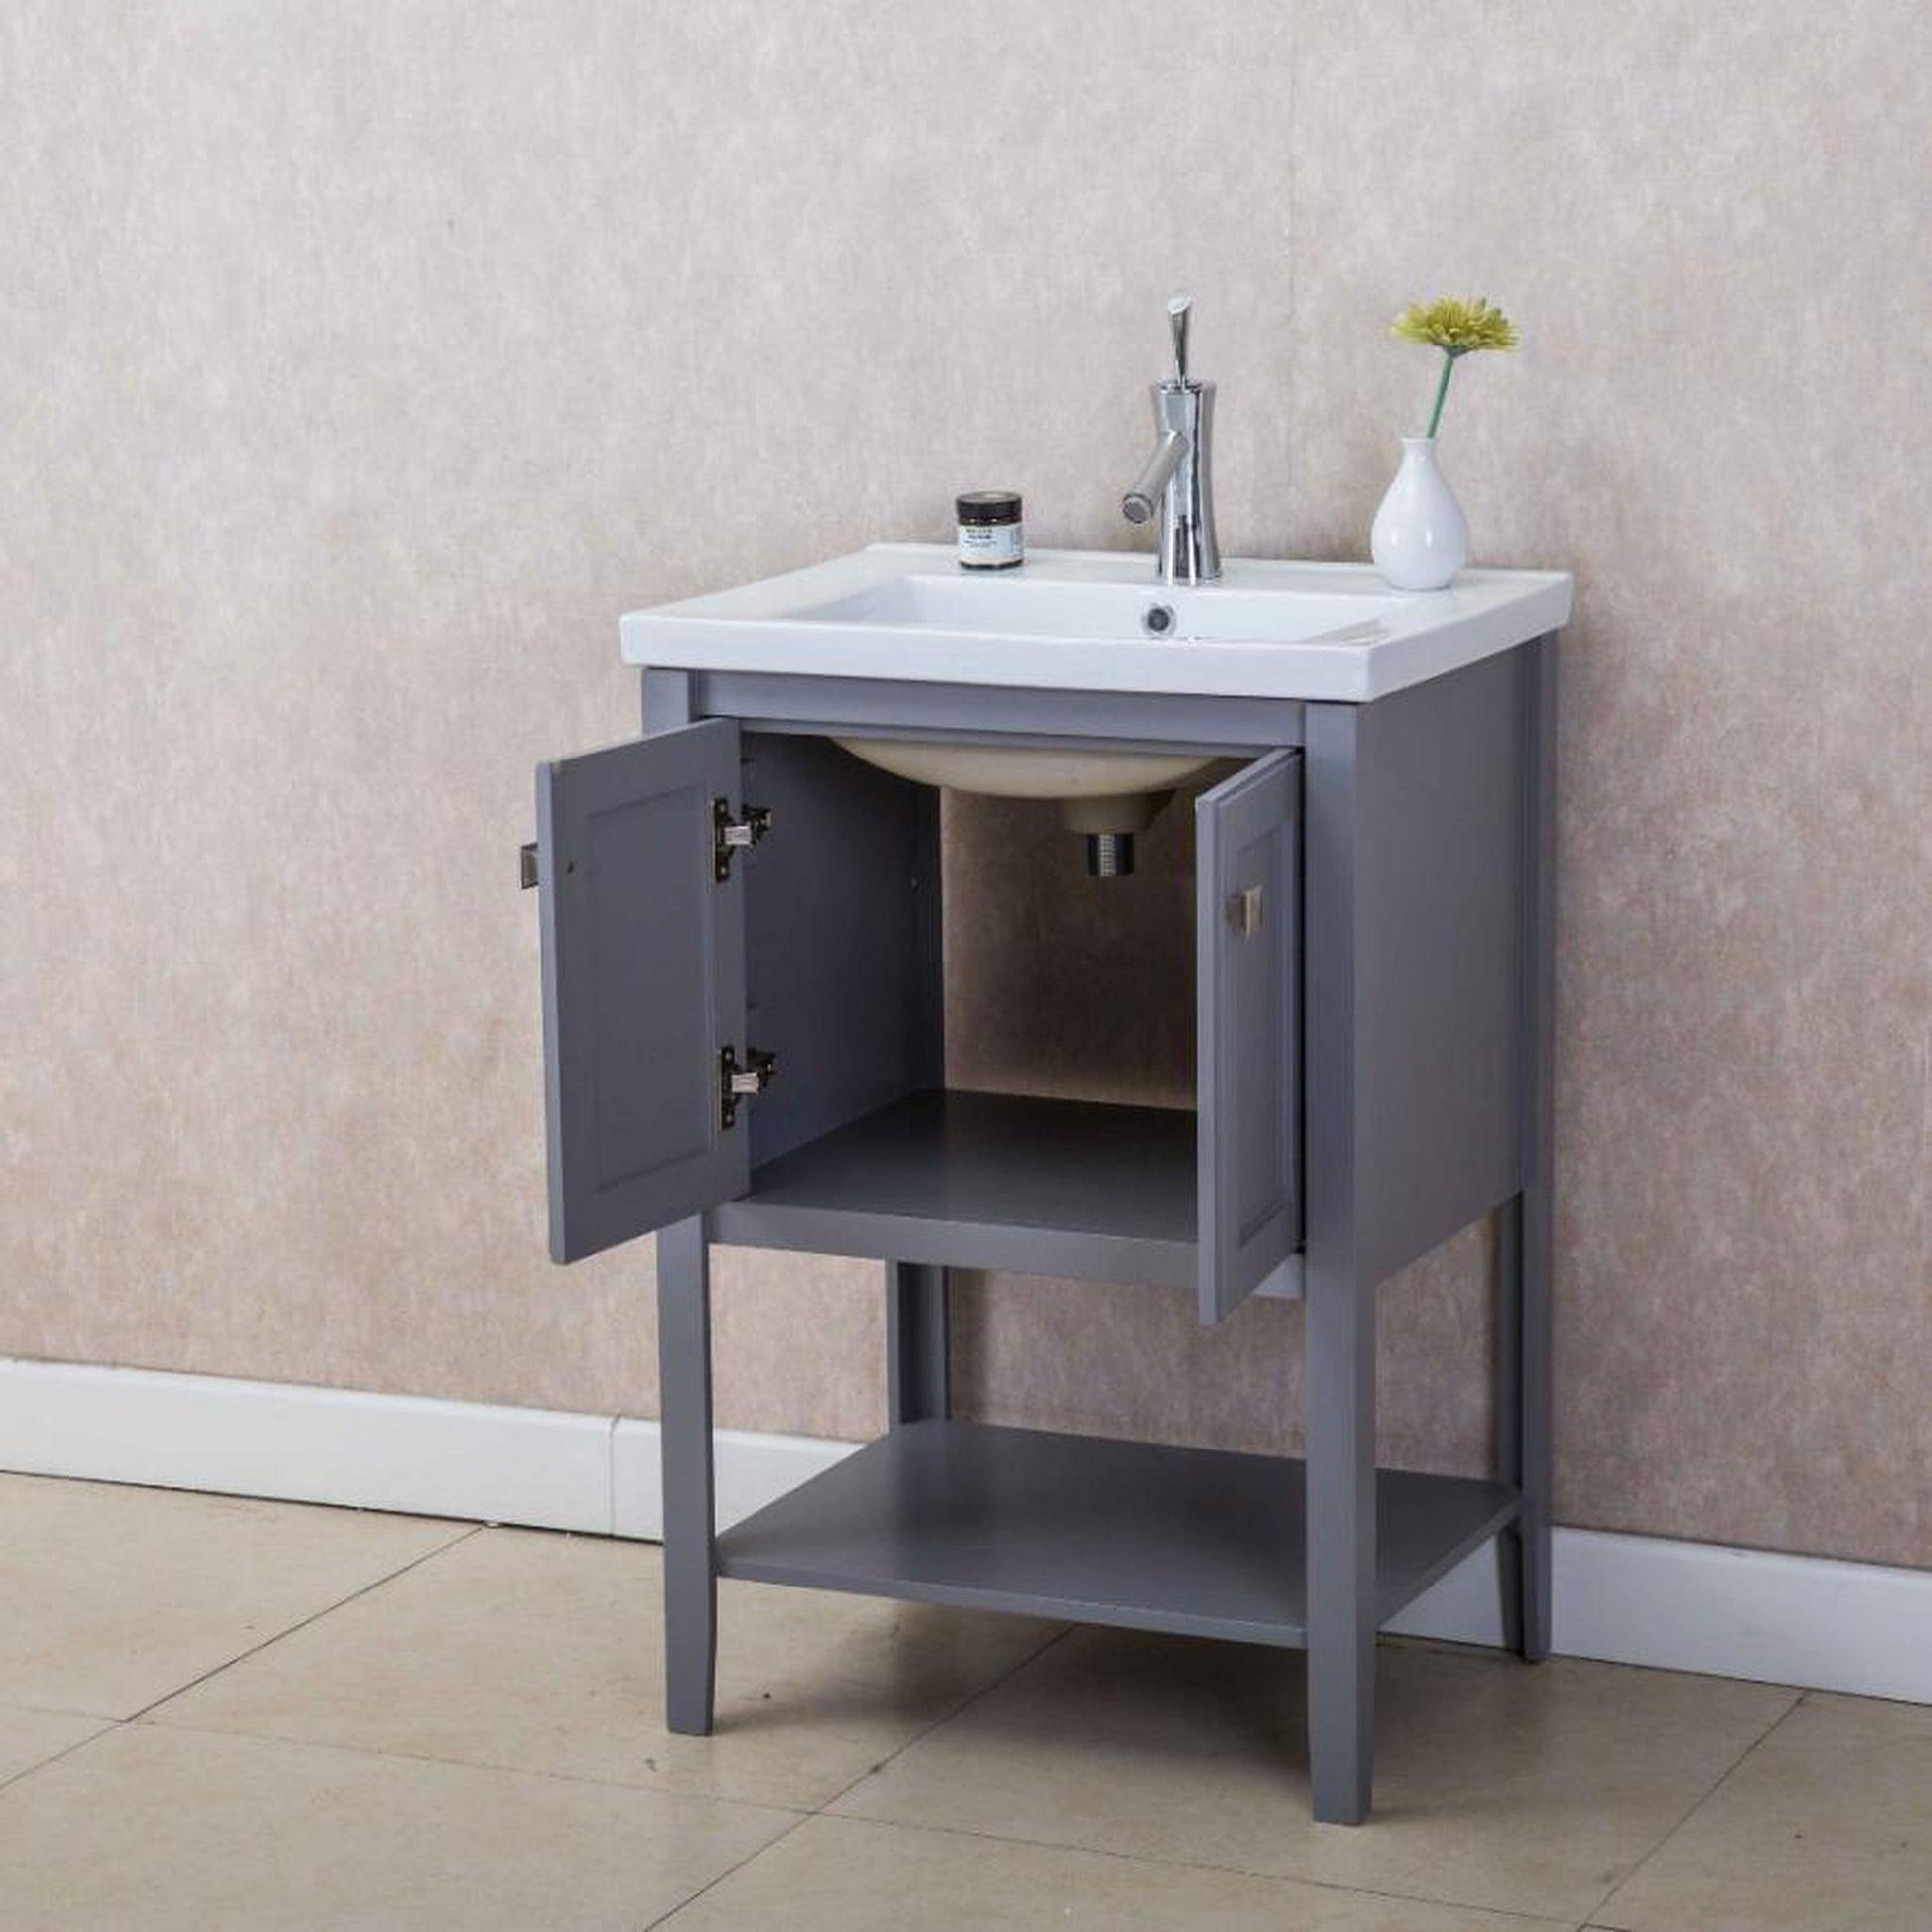 Eviva Tiblisi 24" x 34" Gray Freestanding Bathroom Vanity With White Integrated Porcelain SInk